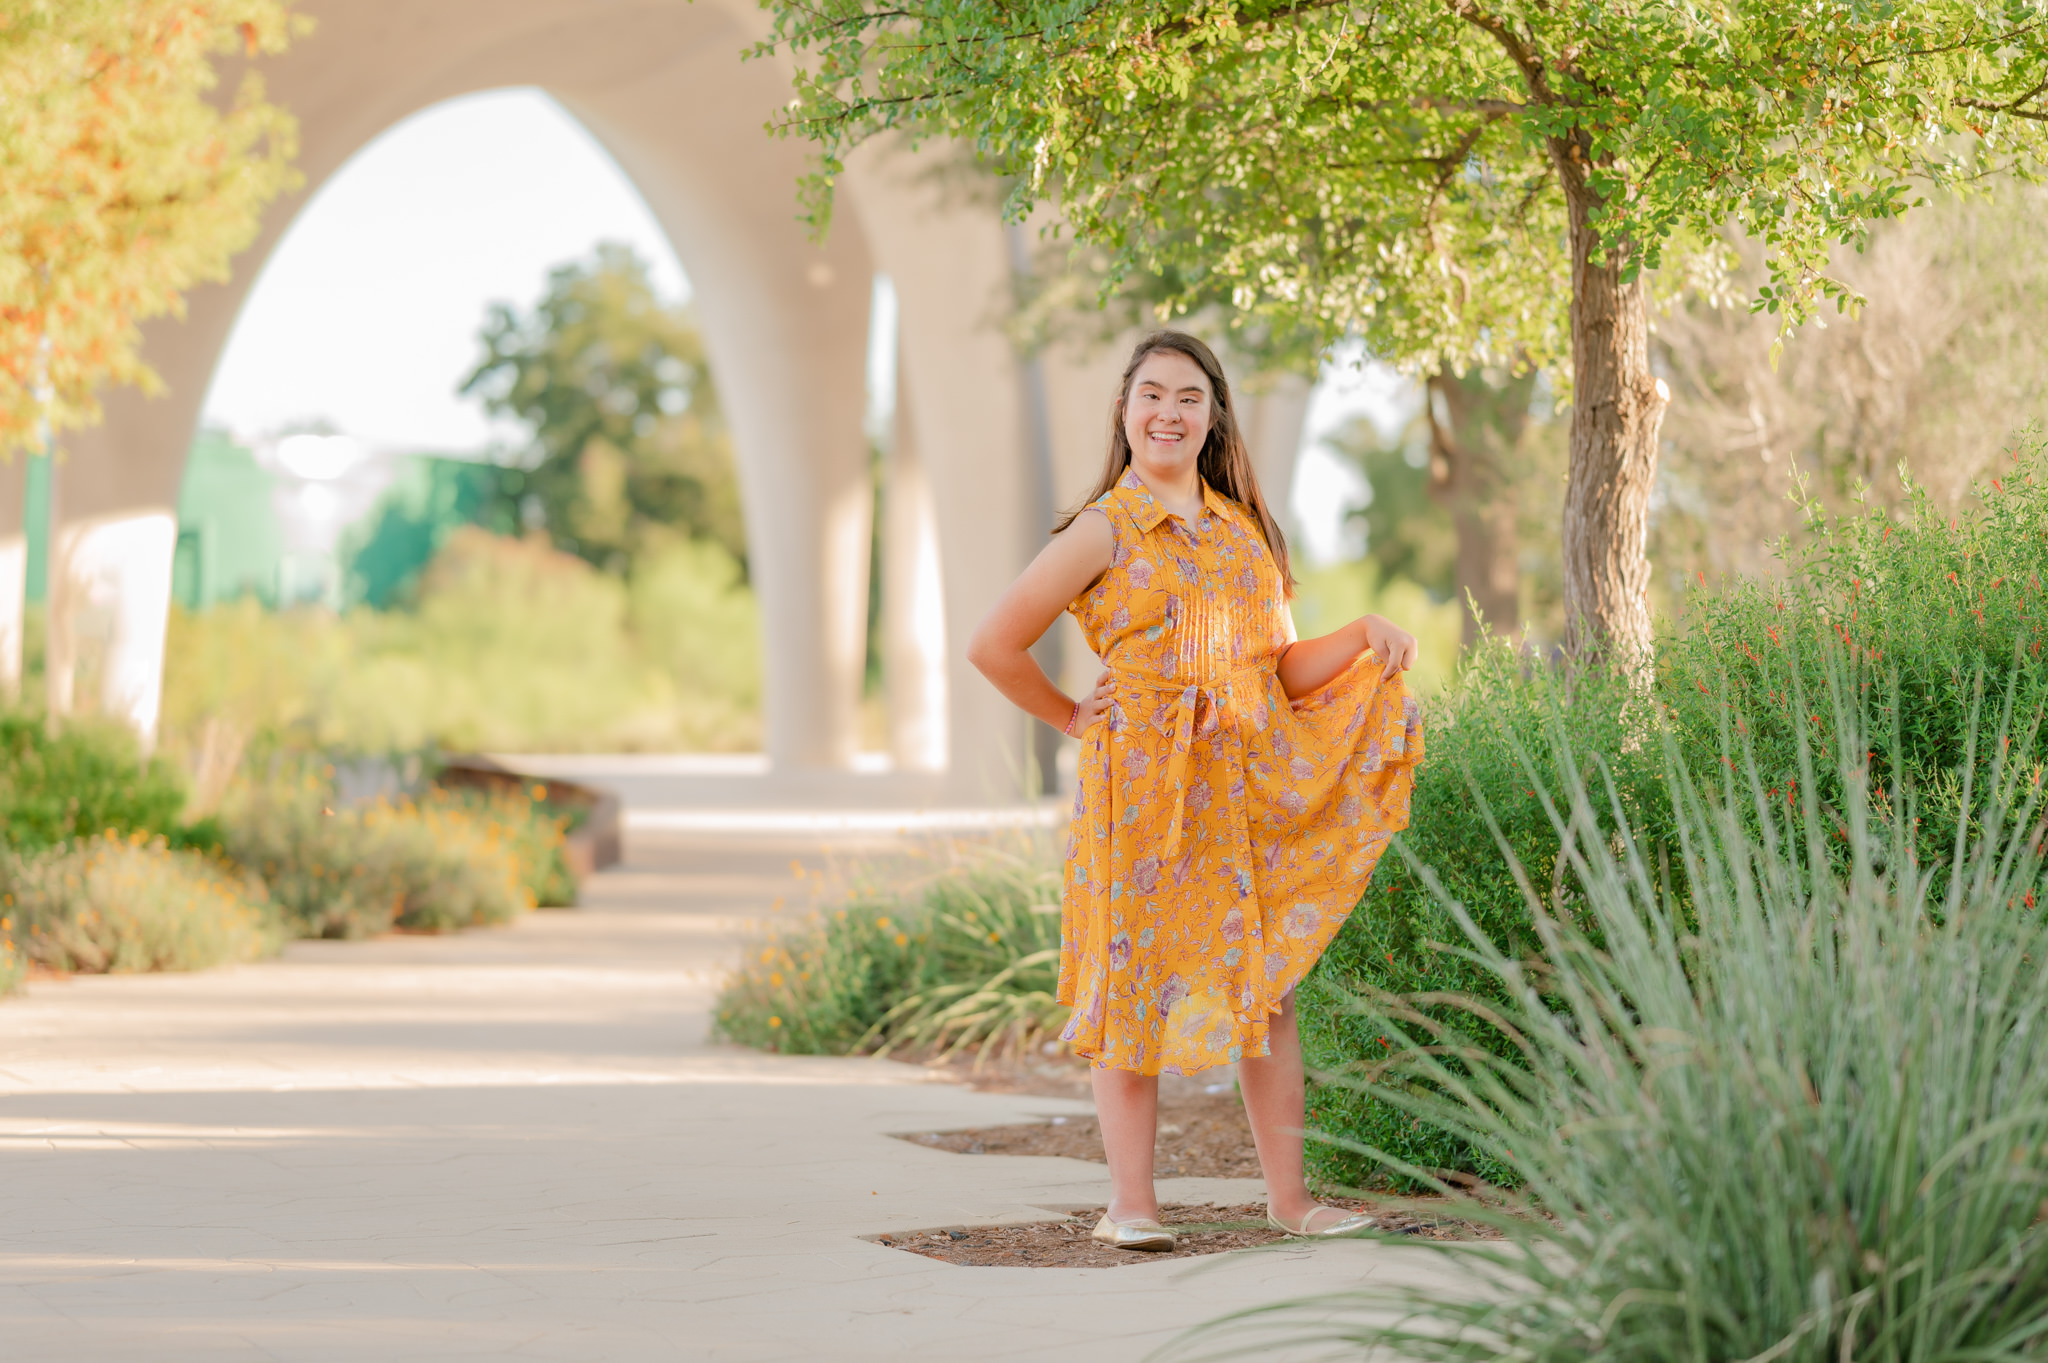 A teen girl with Down syndrome wears a springy yellow dress and swishes her skirt around while laughing. Image taken by San Antonio disability photographer Cassey Golden.